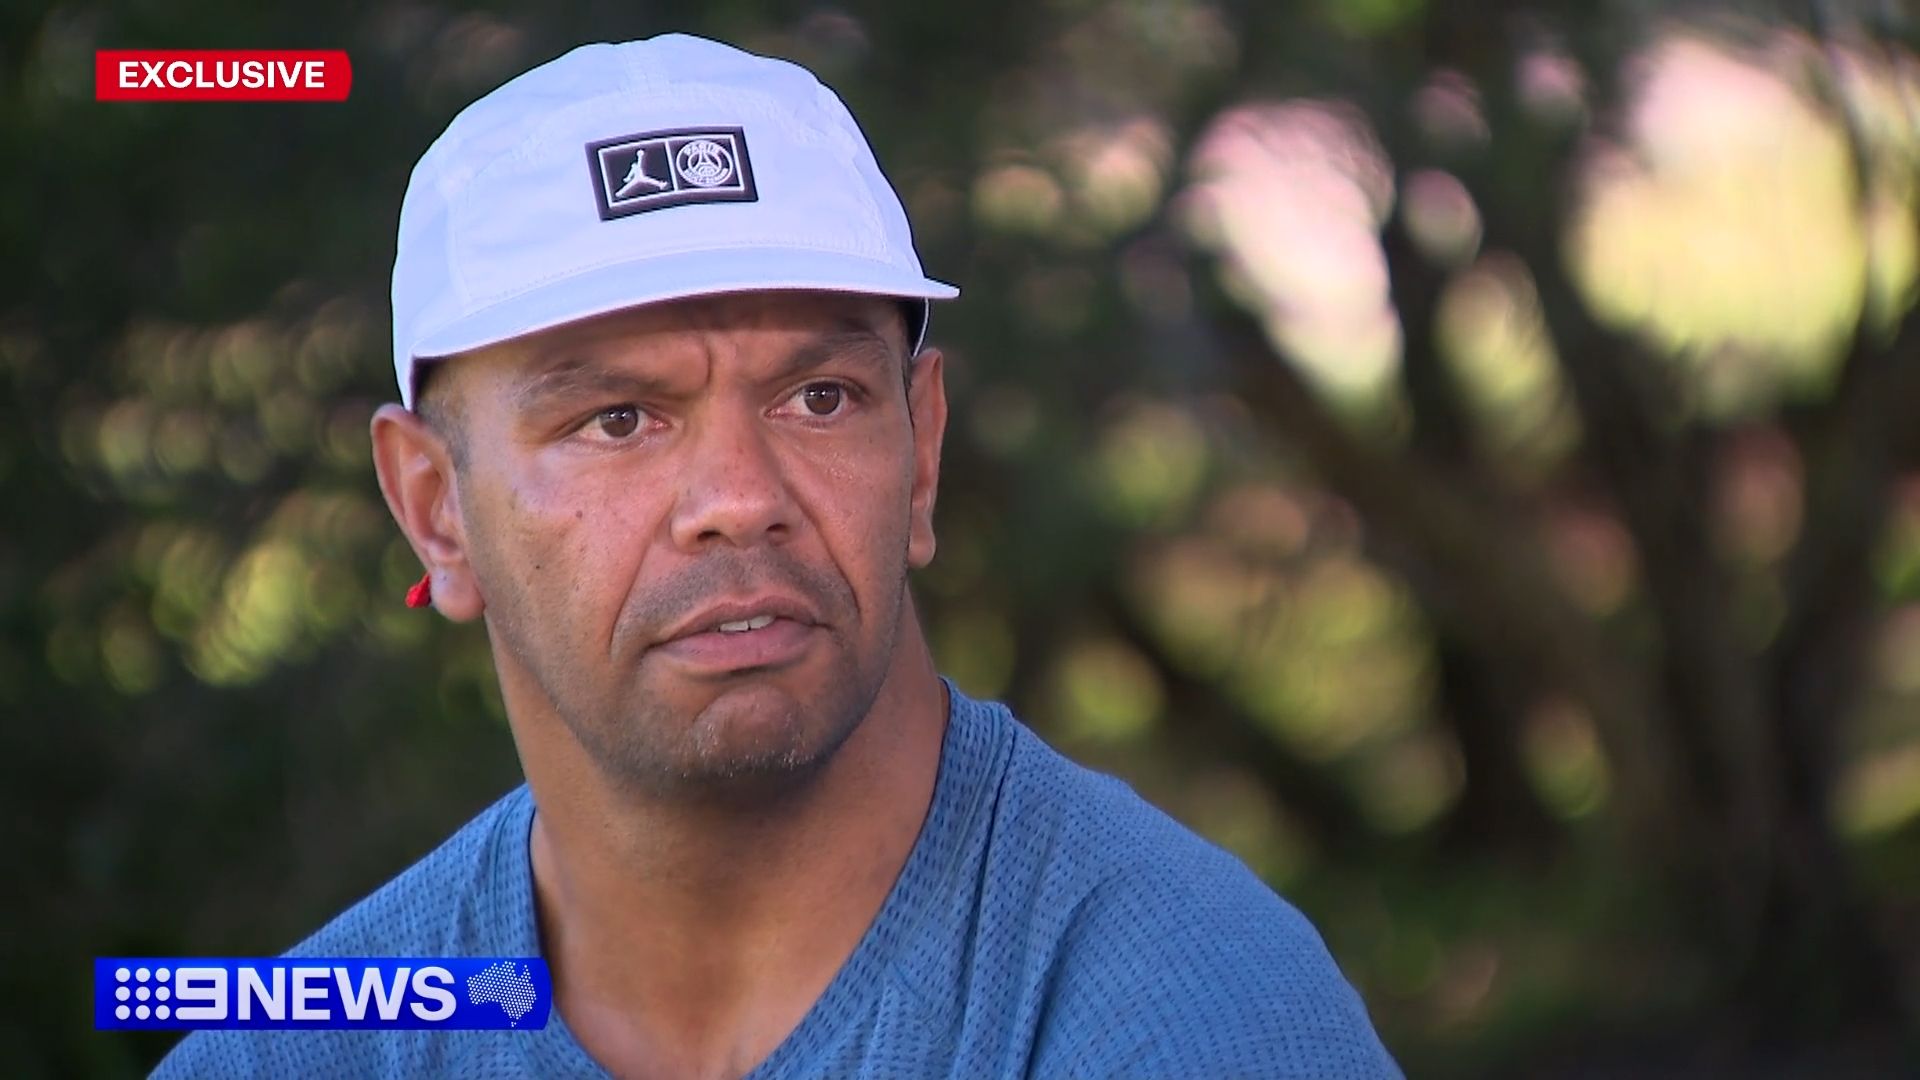 'I'd love to see him back': Waratah reacts to news of Kurtley Beale's rugby return